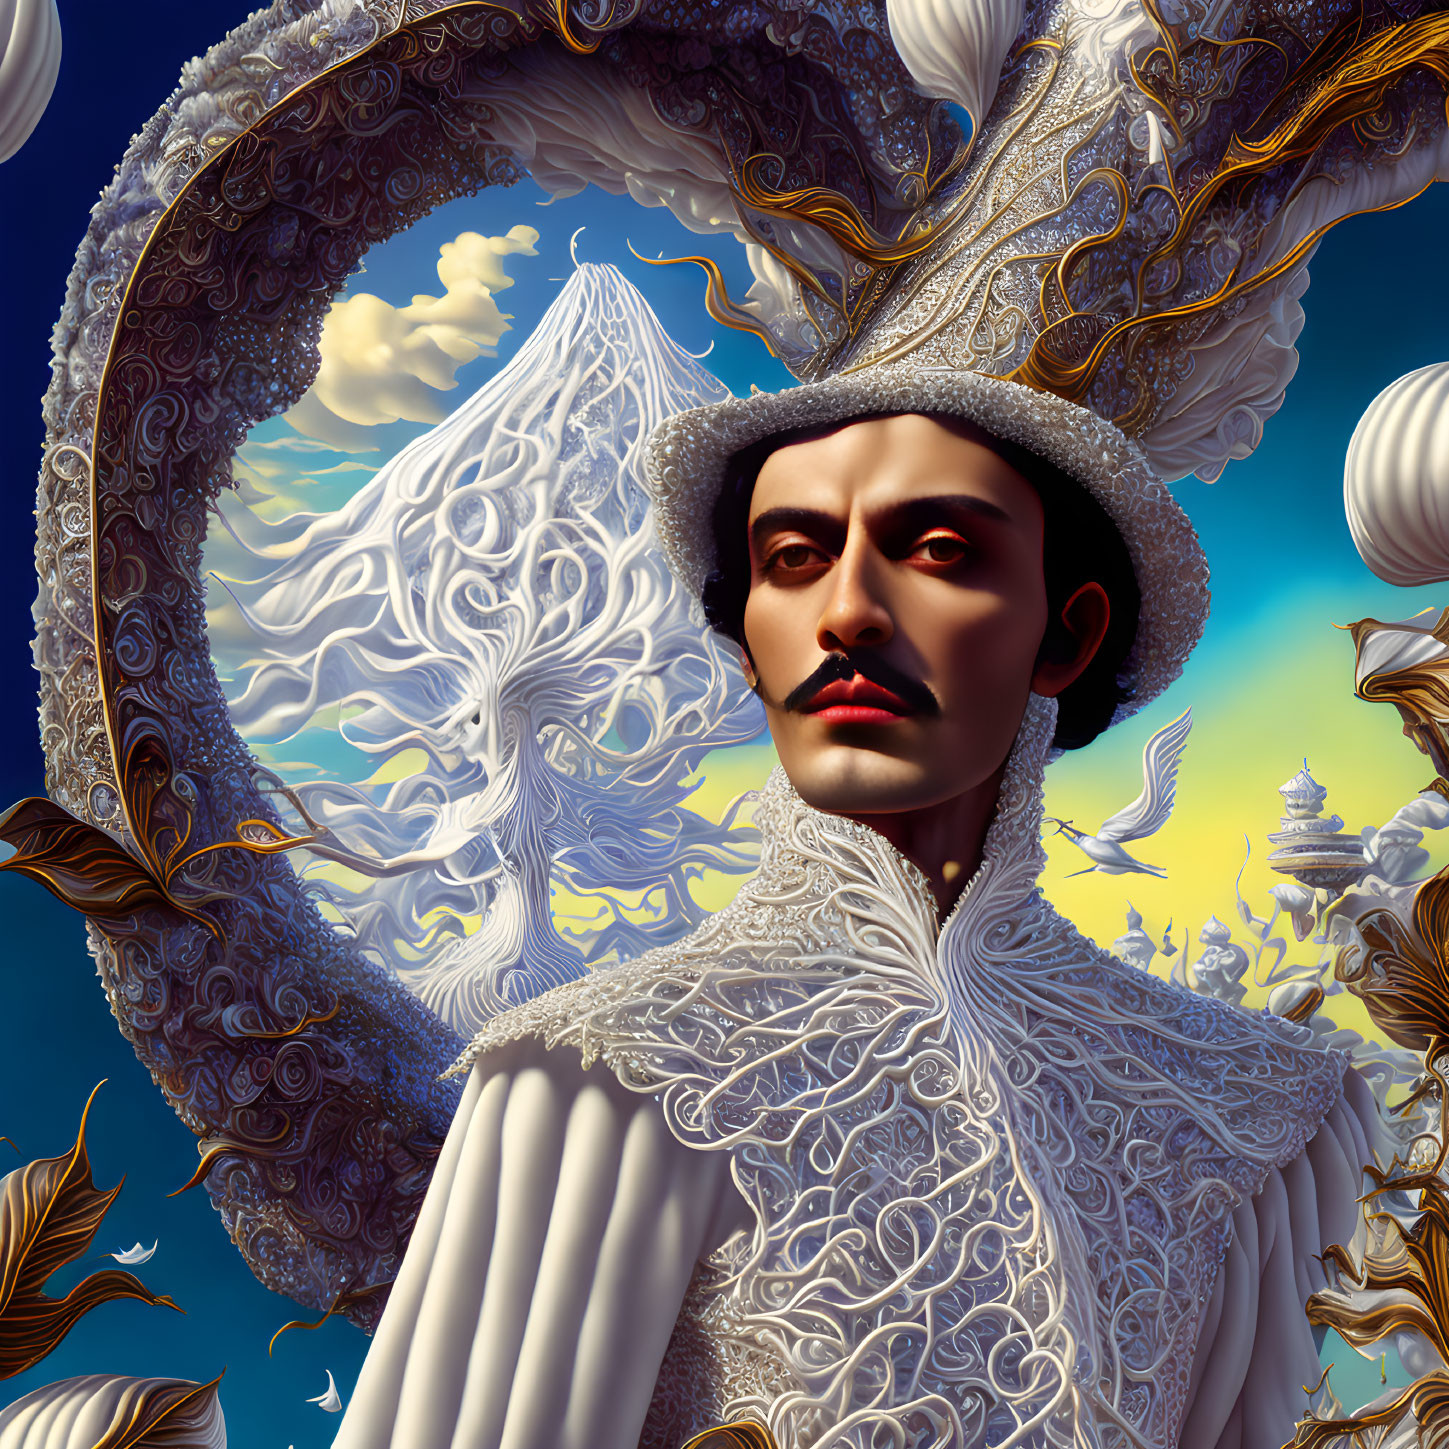 Illustrated portrait of stern person with lace collar and headdress against surreal sky.